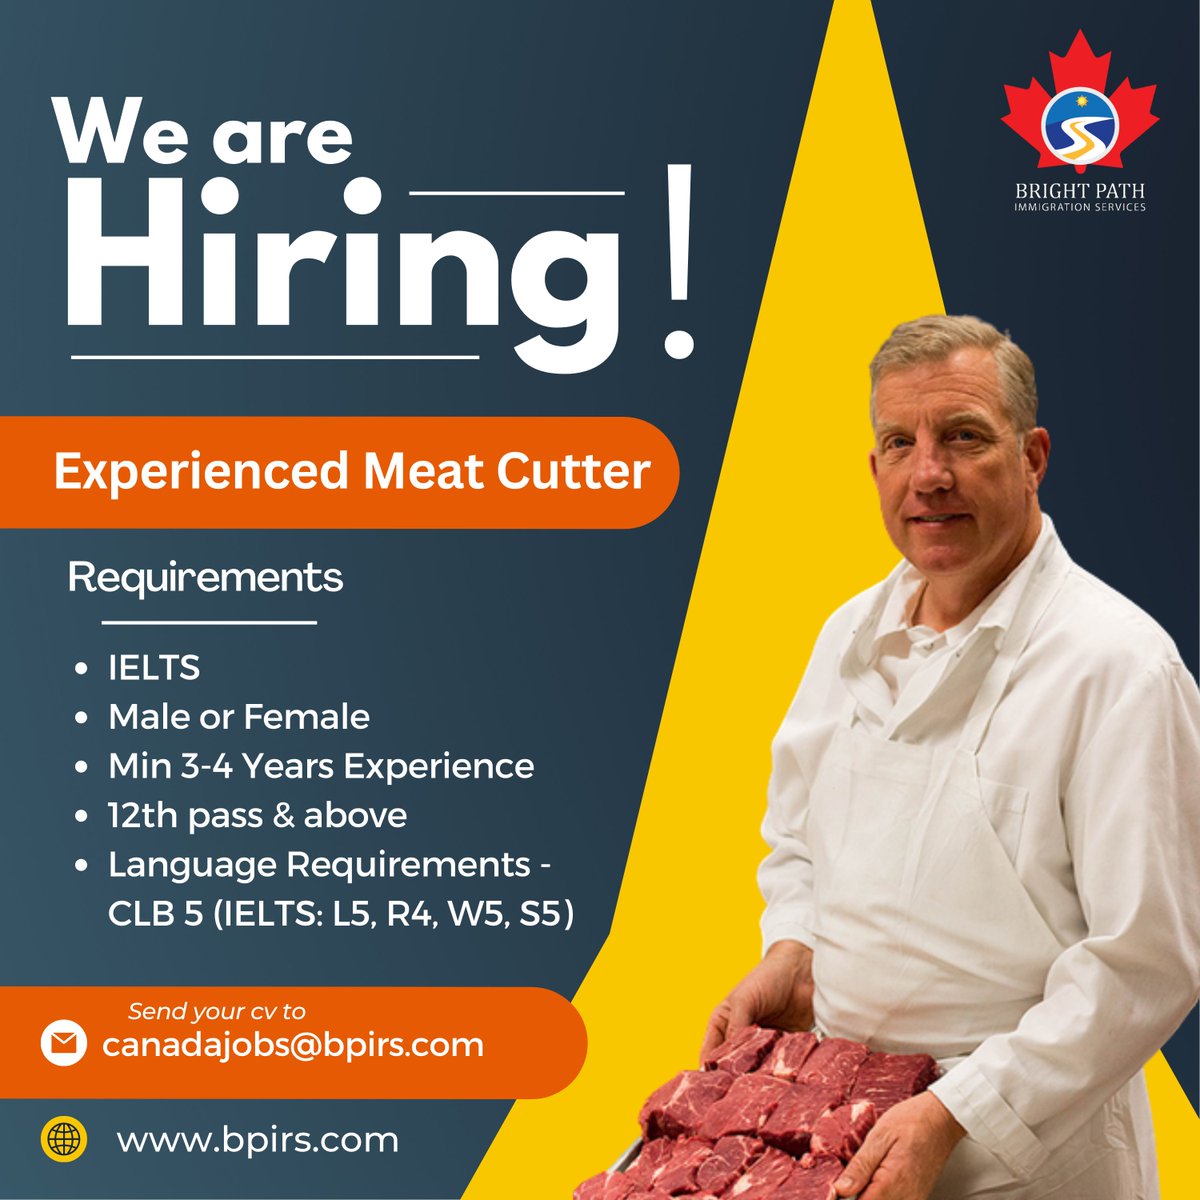 We're Hiring! Experienced Meat Cutter
Inside / Outside Canada

🍁CONTACT🍁
📧: canadajobs@bpirs.com
🌐: bpirs.com

#bpirs #canadaimmigration #canada #workpermitcanada #permanentresident #hiringnow #cook #eperience #joboffering #meatcutter #experience